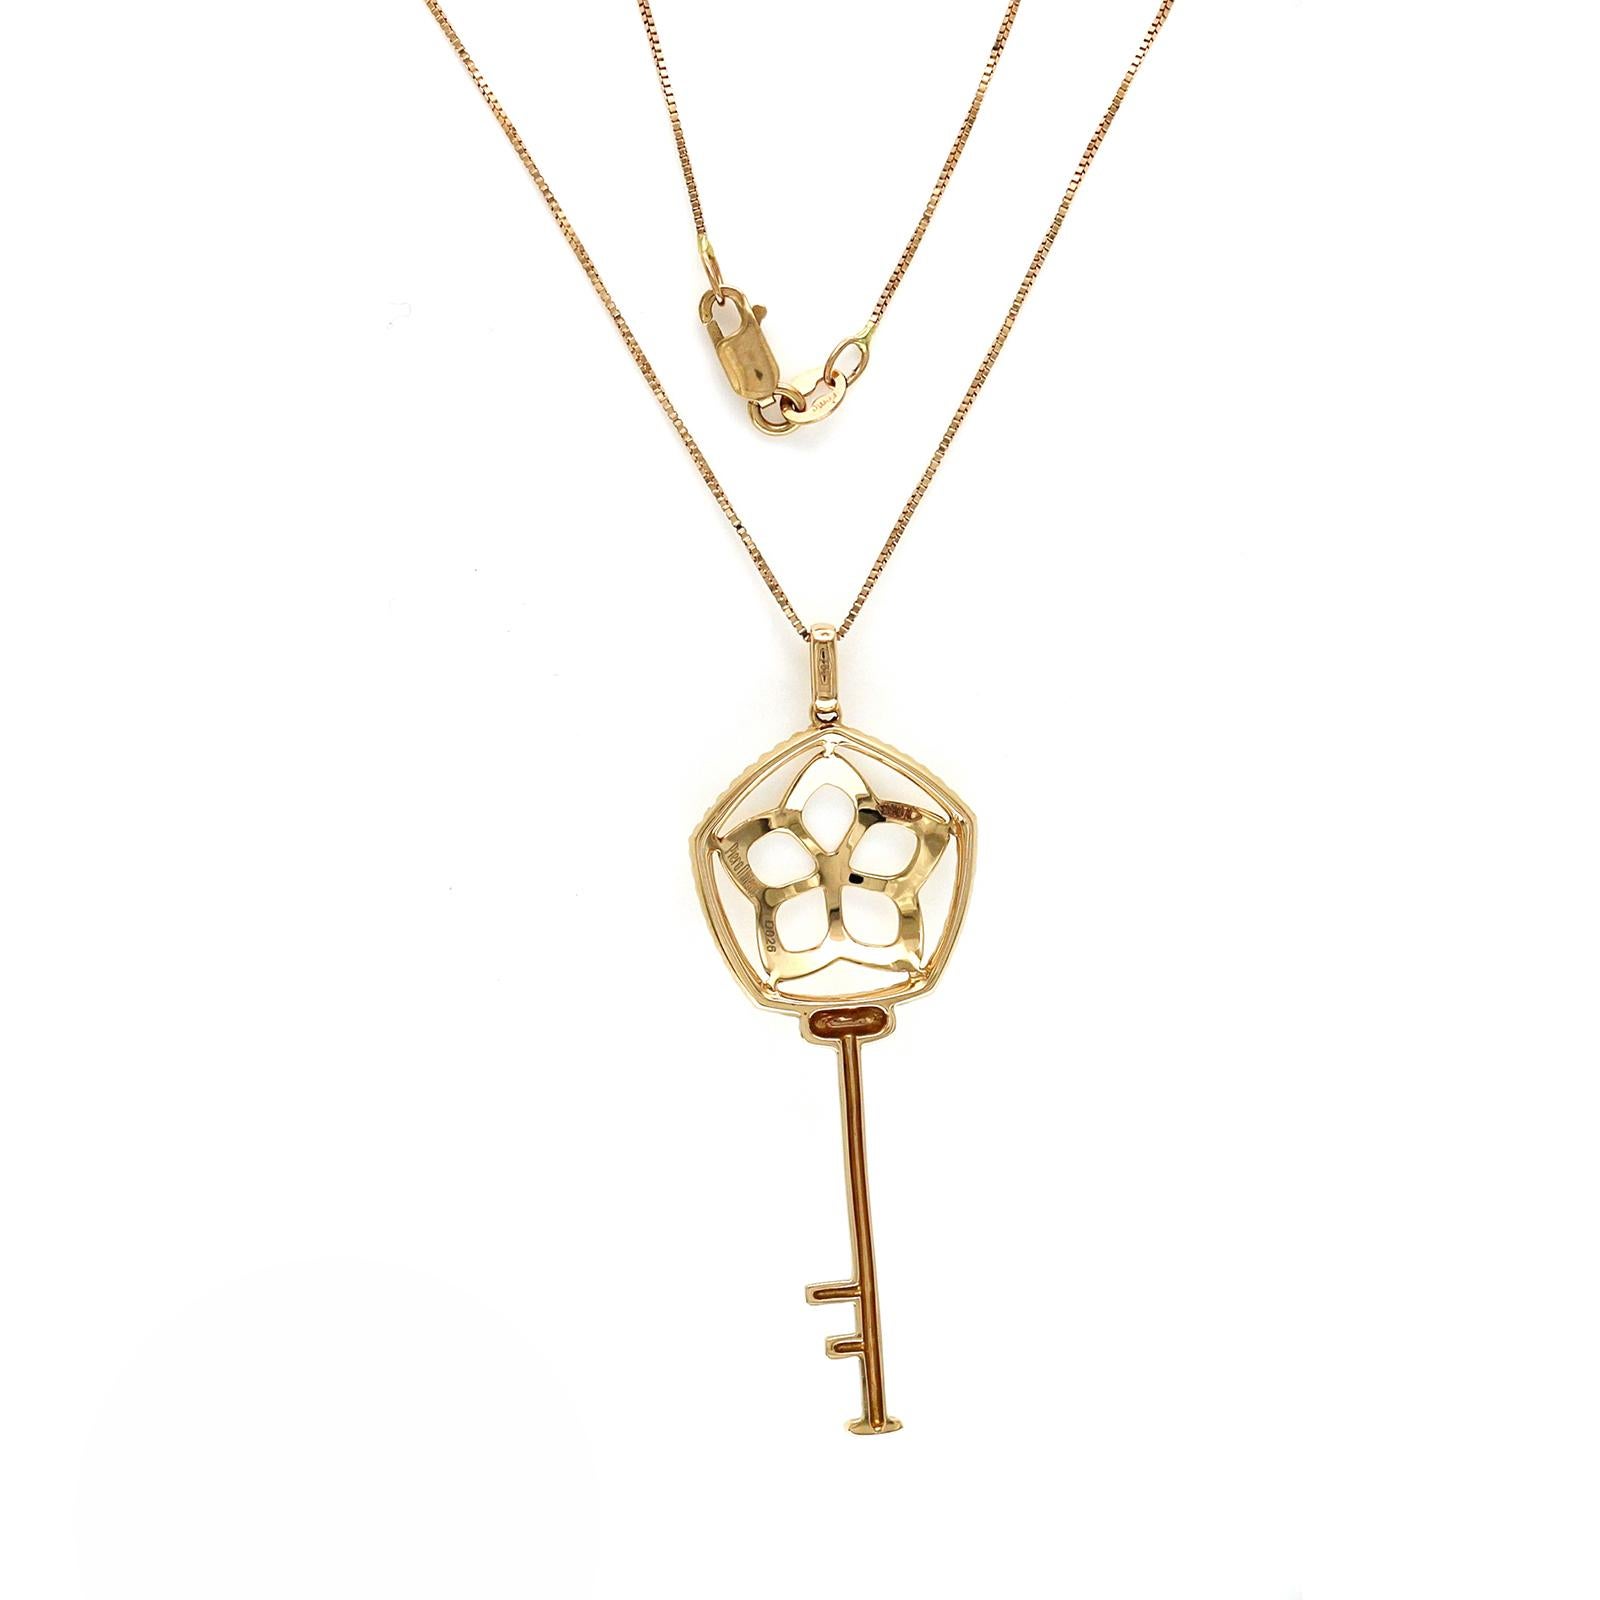 Piero Milano 18K Rose Gold 0.26 Ct Diamond Key Pendant Necklace In New Condition For Sale In Los Angeles, CA